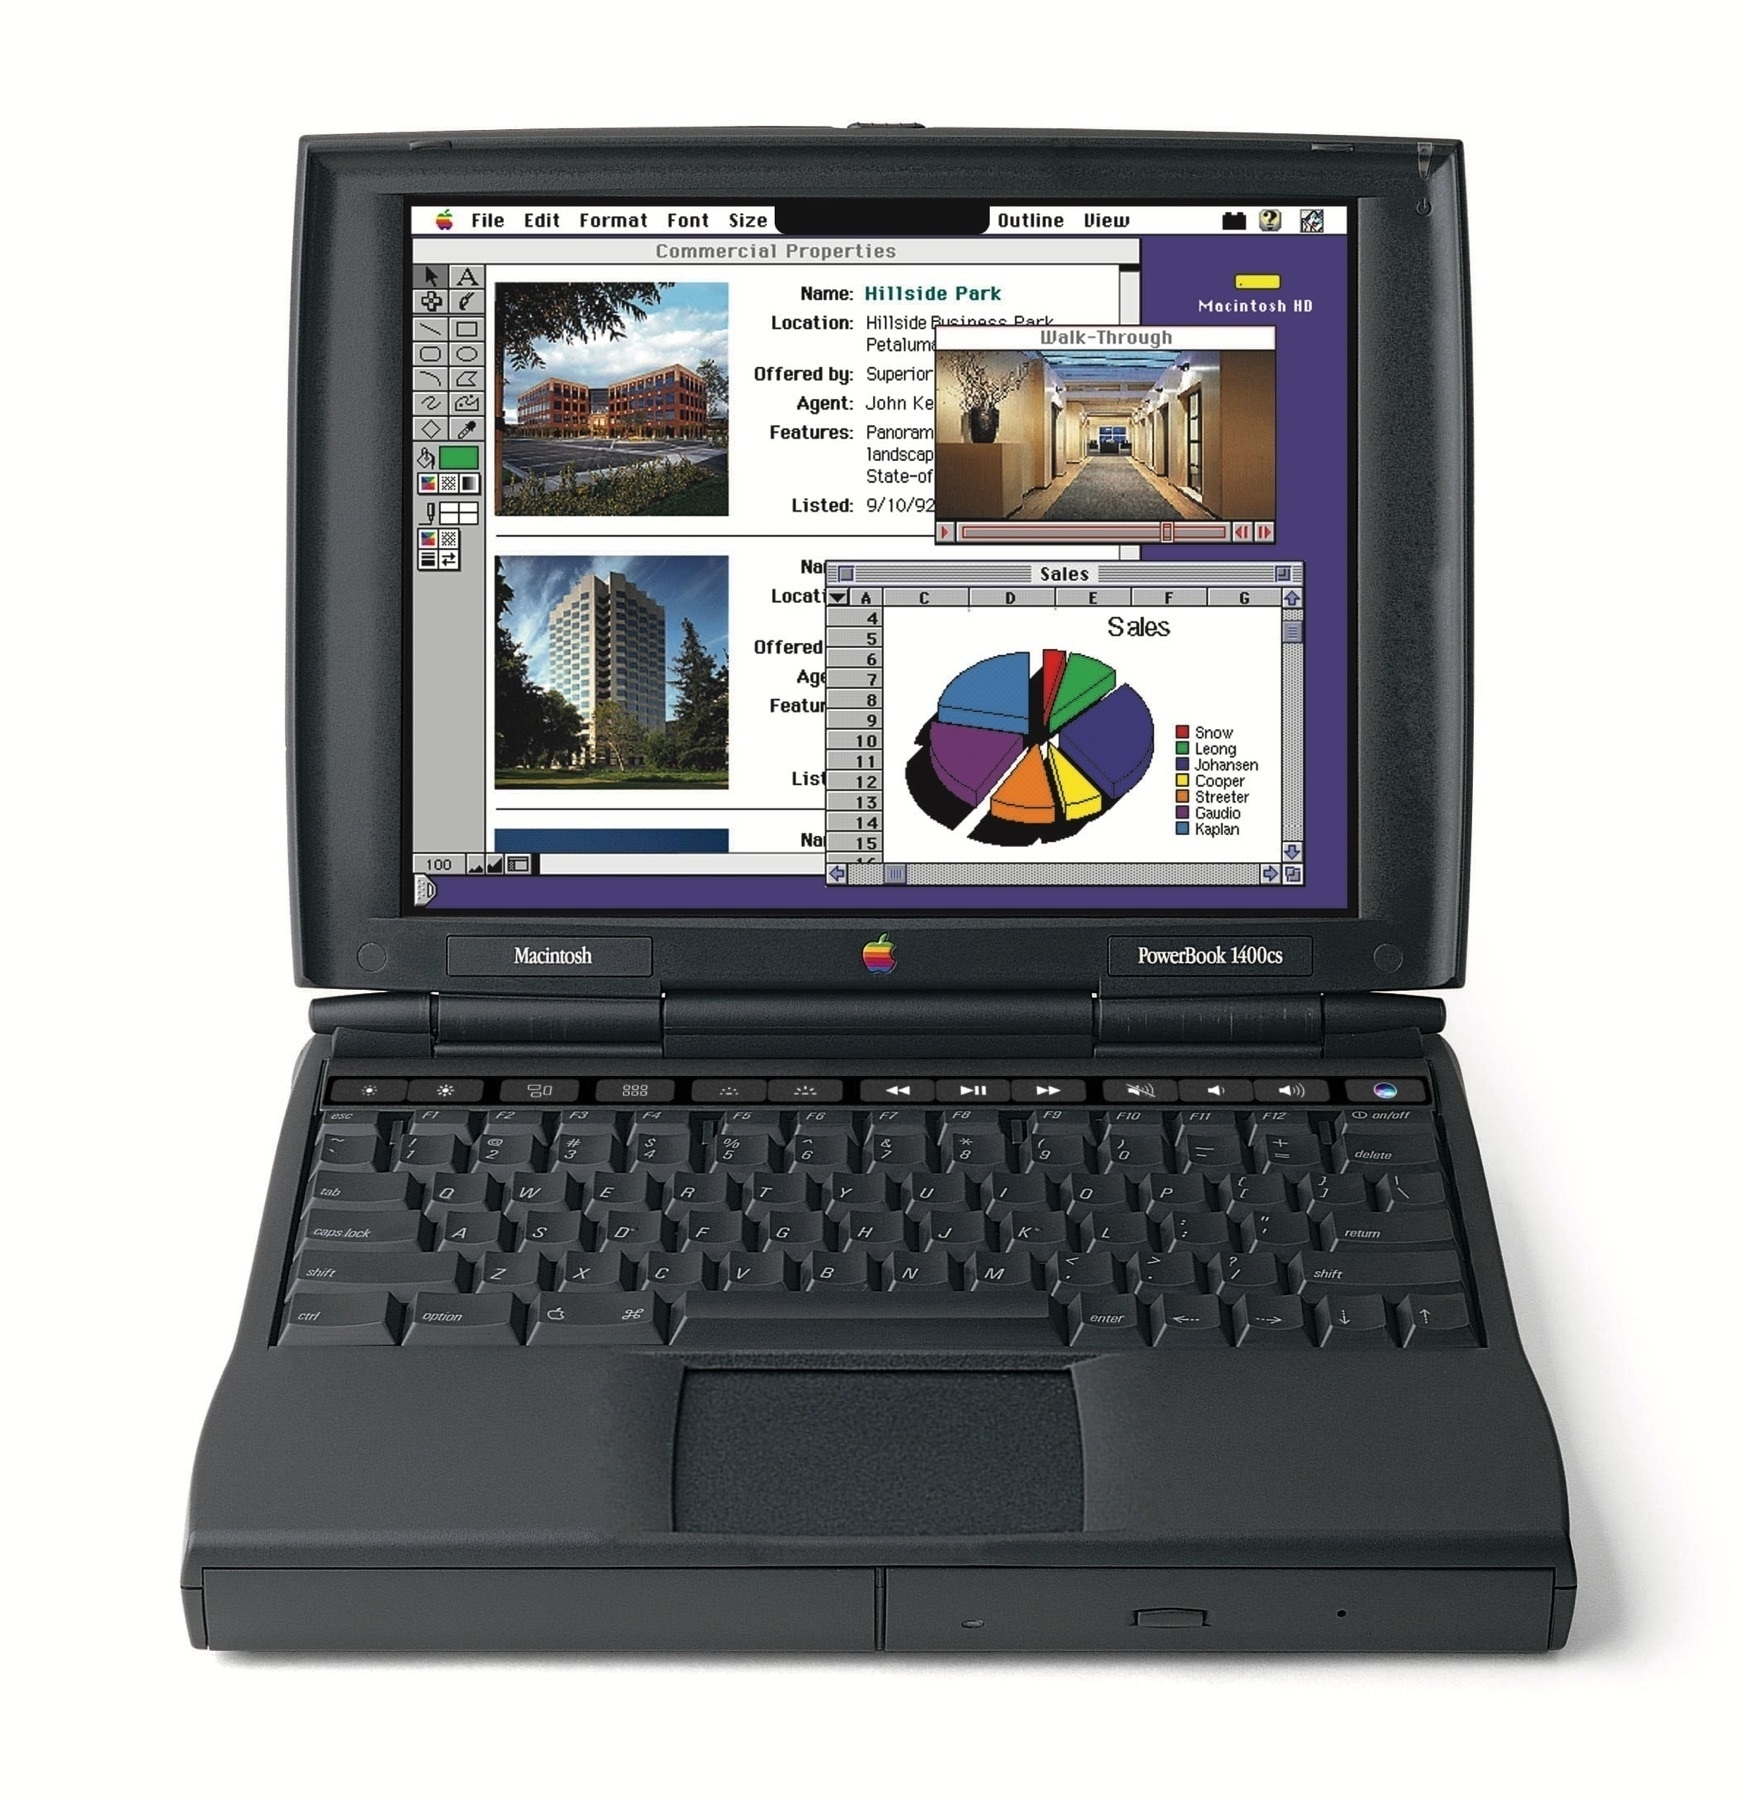 PowerBook 1400cs with Notch, TouchBar, and large TrackPad